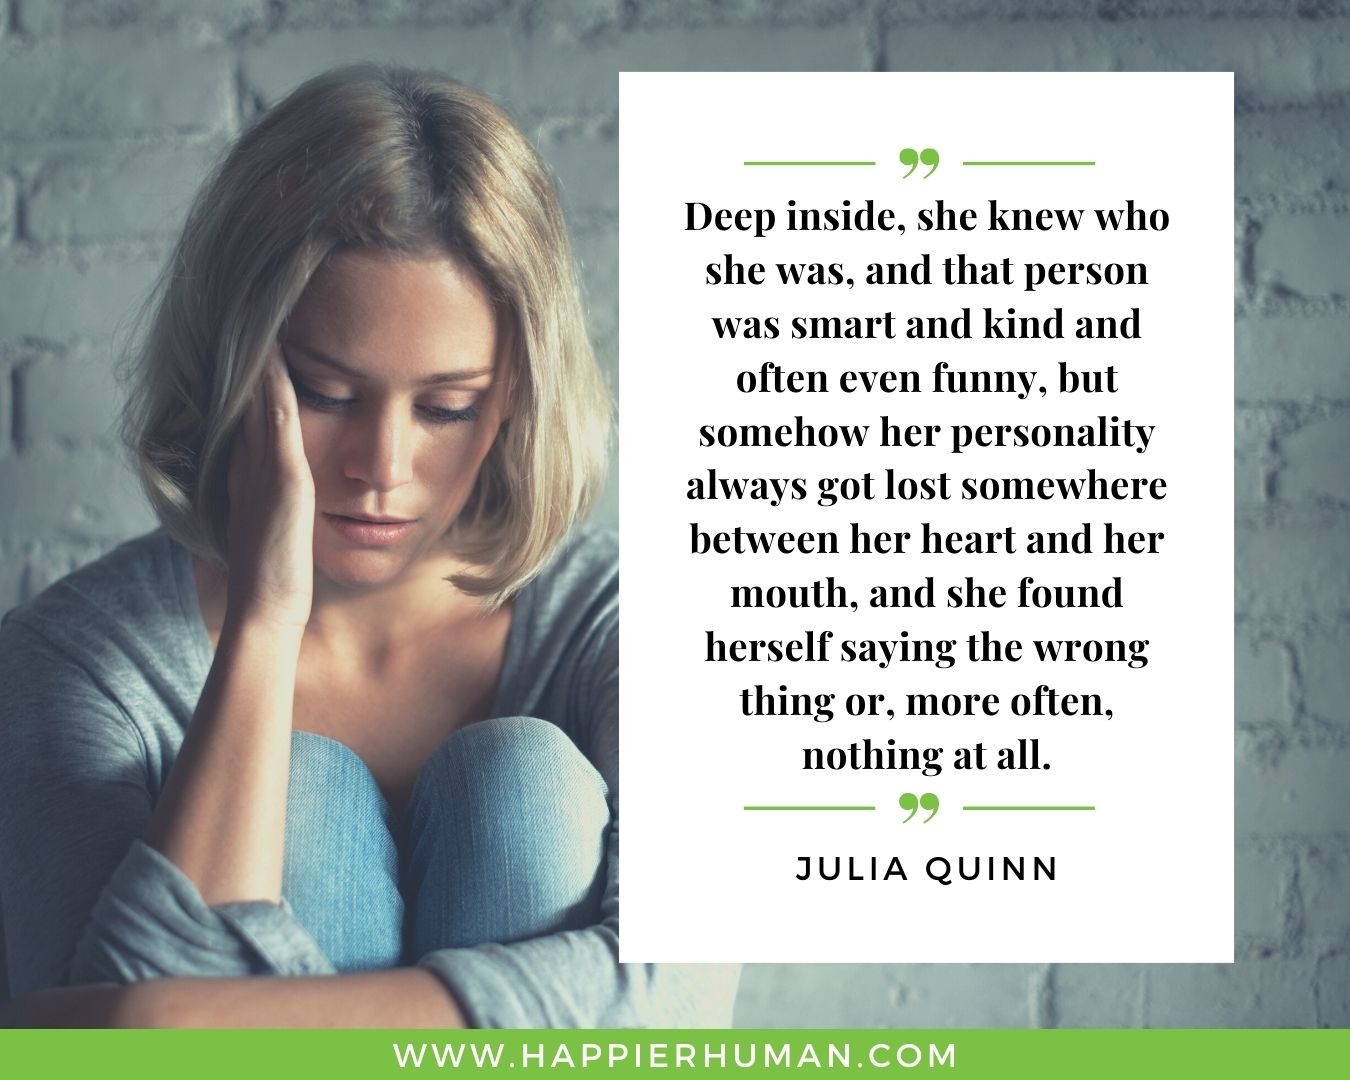 Introvert Quotes - “Deep inside, she knew who she was, and that person was smart and kind and often even funny, but somehow her personality always got lost somewhere between her heart and her mouth, and she found herself saying the wrong thing or, more often, nothing at all.” – Julia Quinn